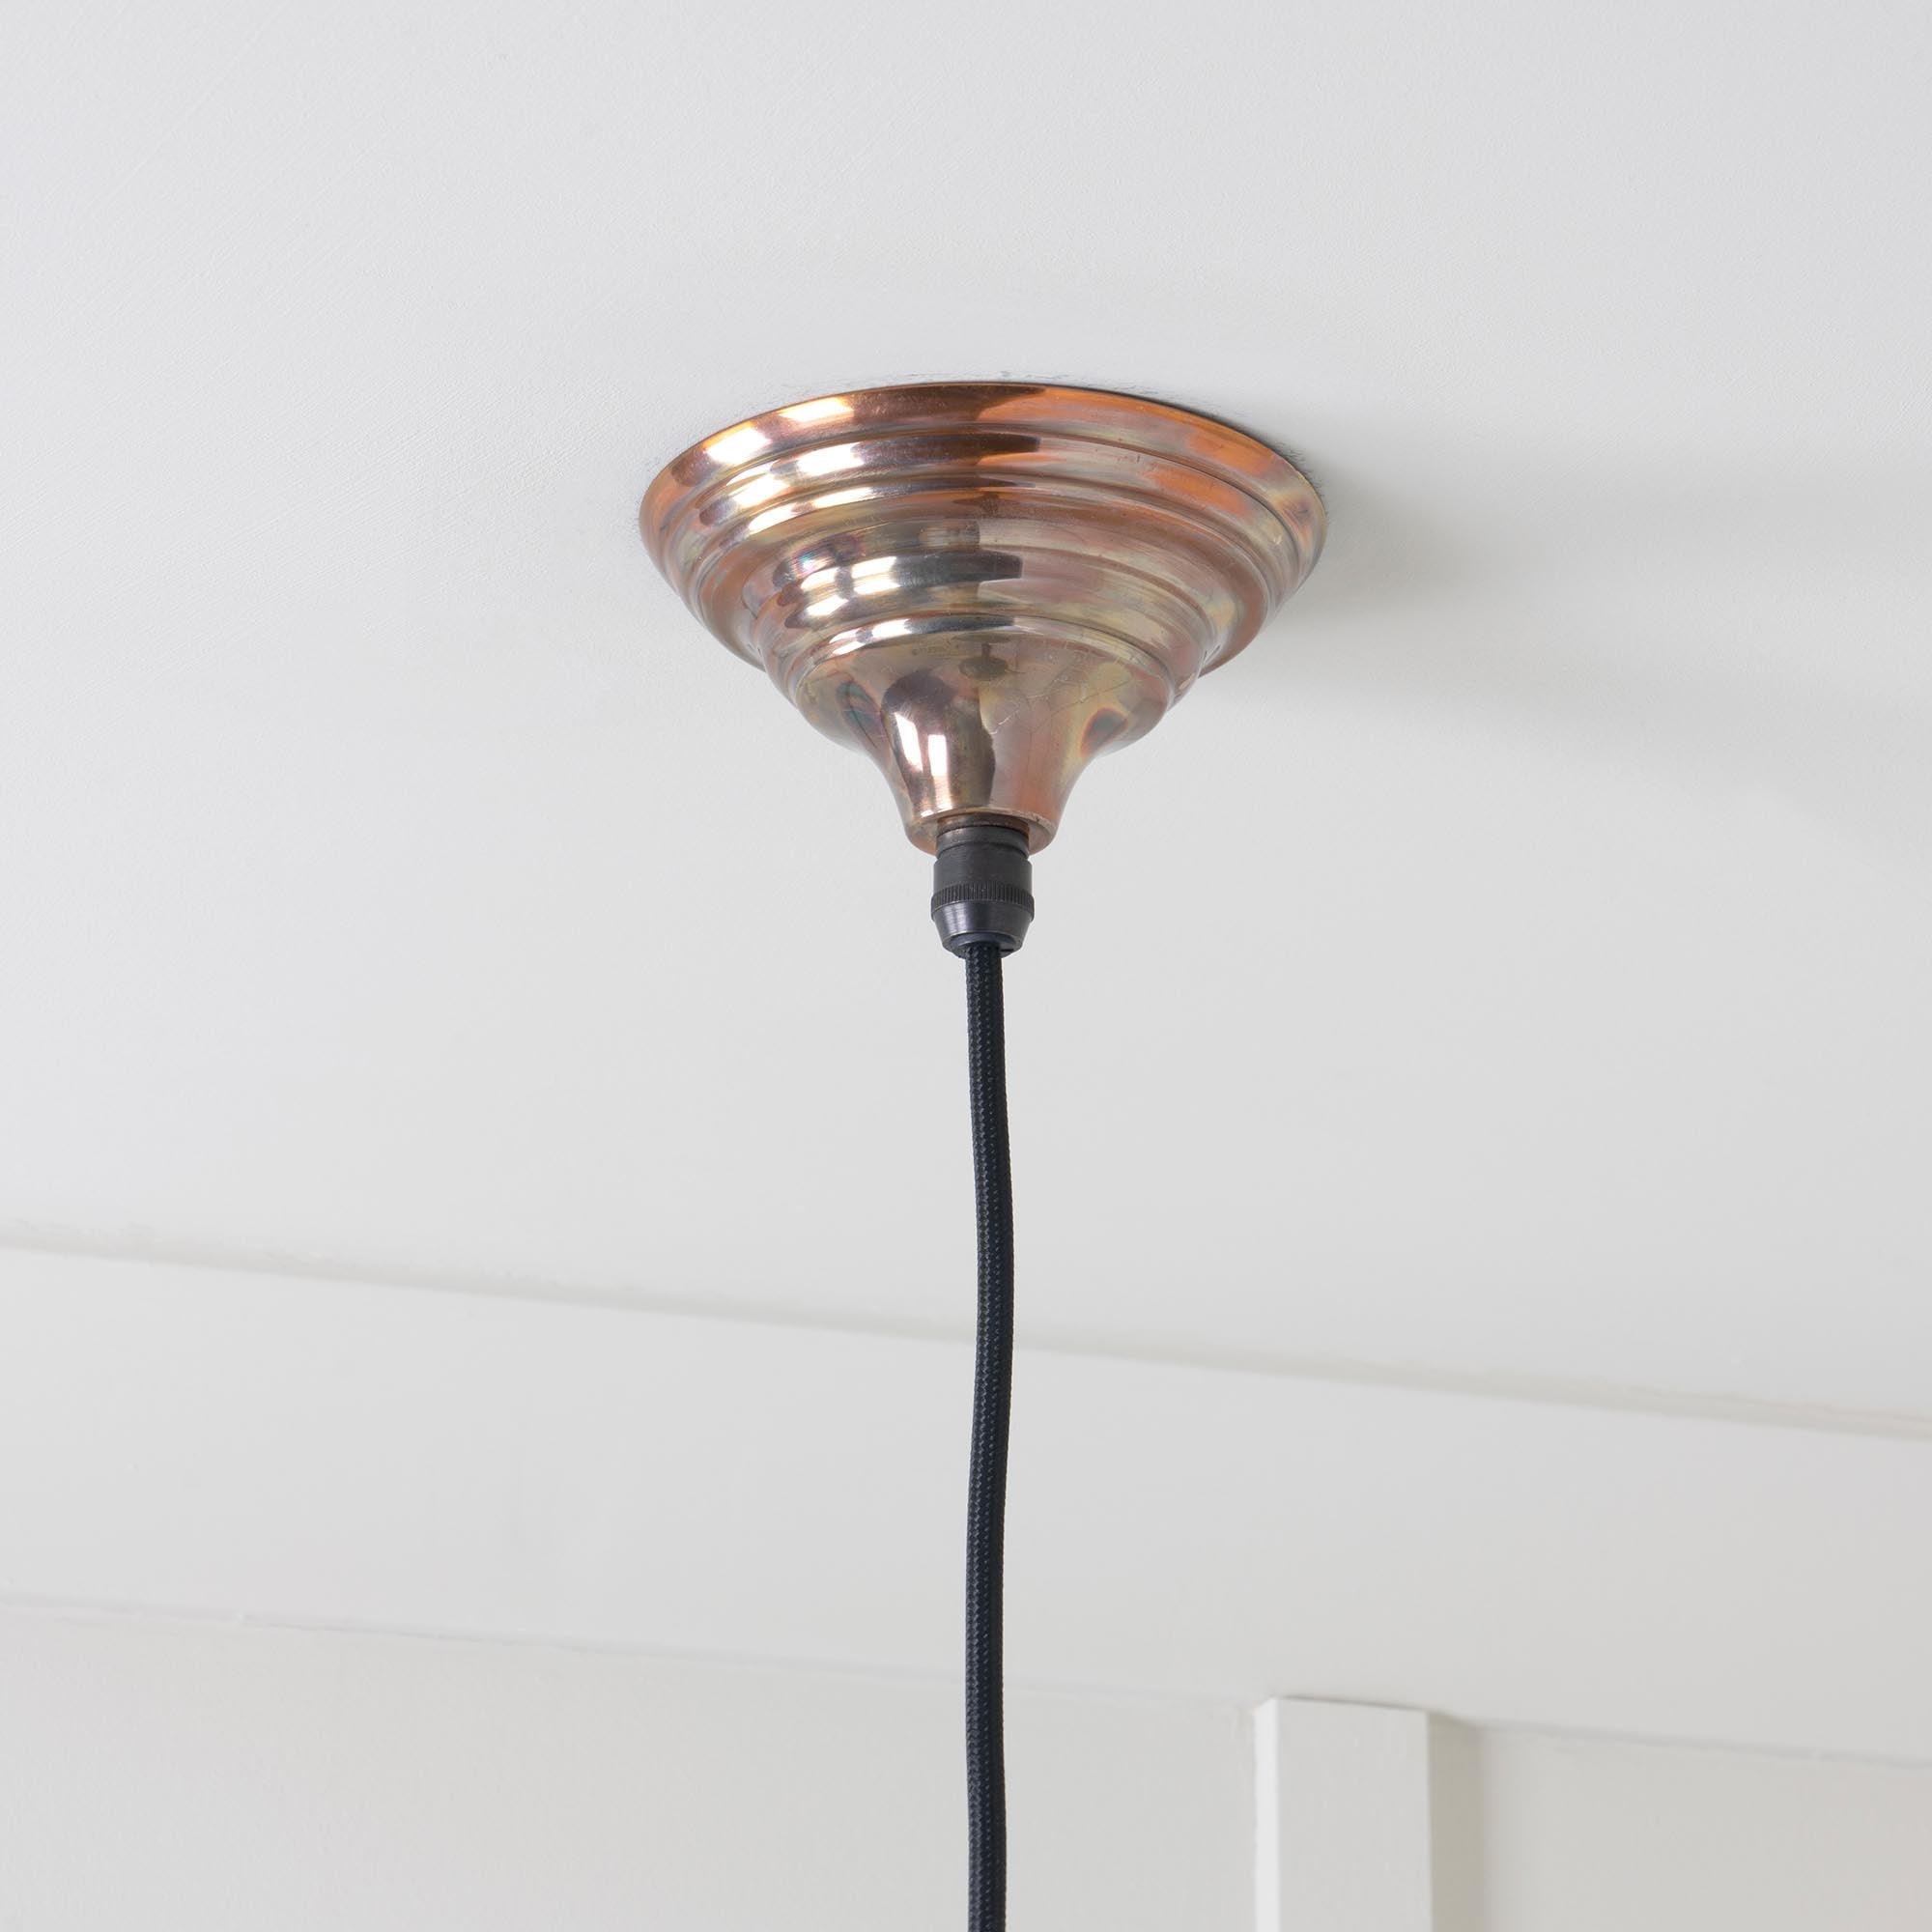 SHOW Close Up Image of Brindley Ceiling Light in Burnished Brass